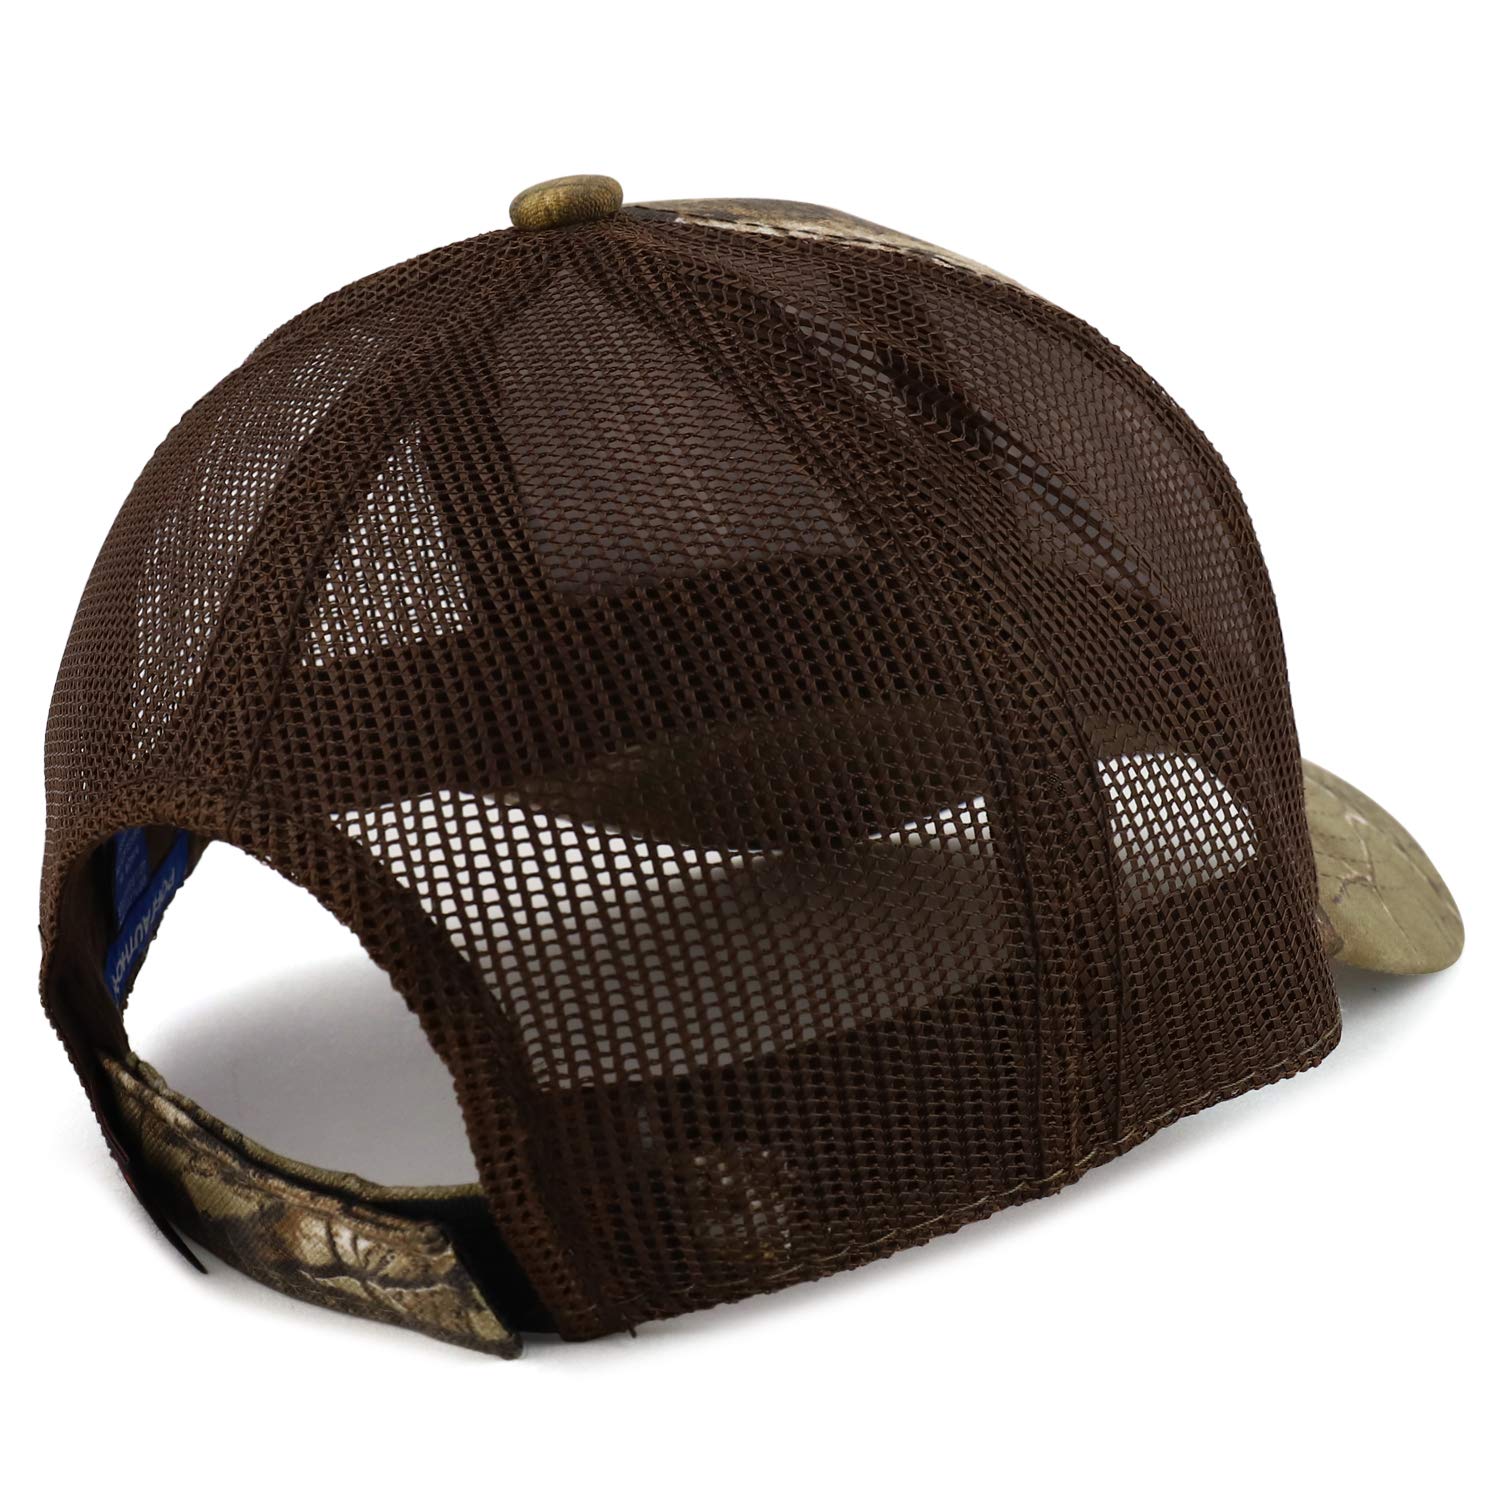 Armycrew Hunting Camouflage Outdoor Trucker Baseball Mesh Back Cap - Realtree Brown